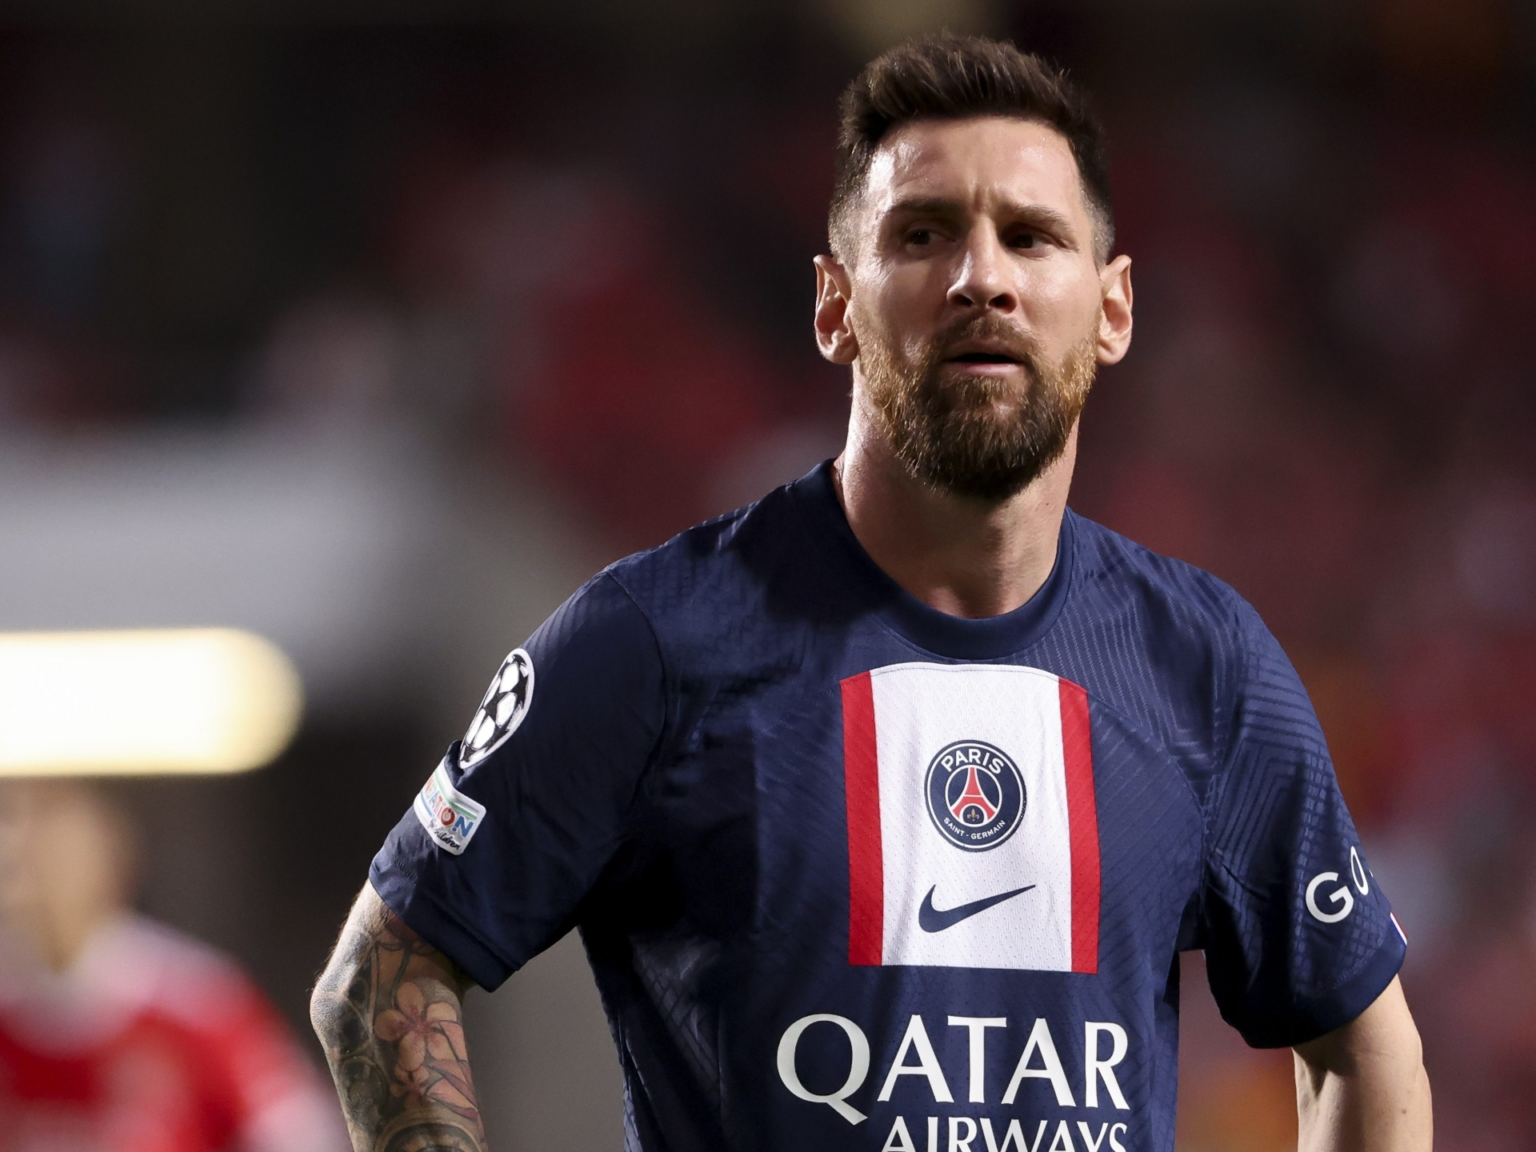 lionel-messi-suspended-by-psg-for-unauthorized-trip-to-saudi-arabia